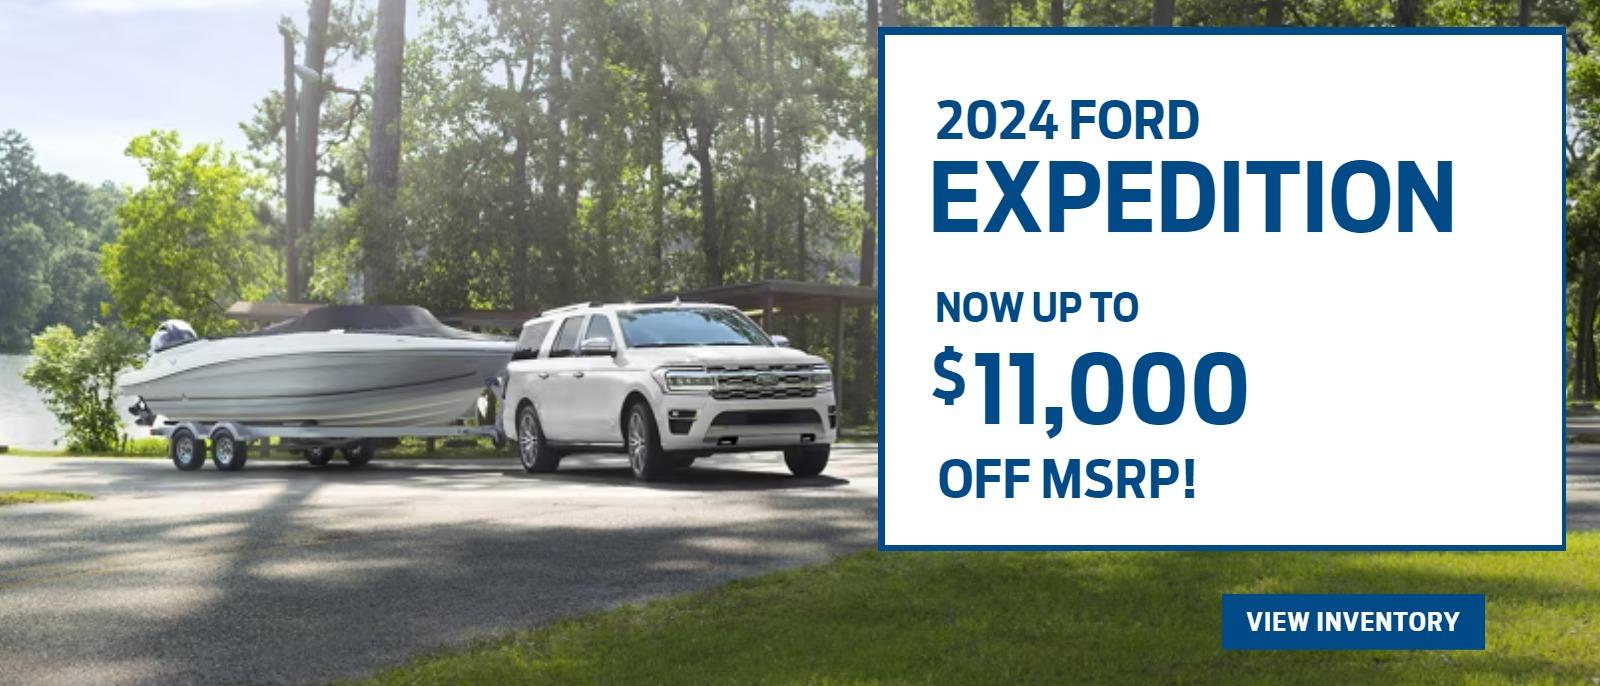 2024 Ford Expedition
Now up to
$11,000 OFF MSRP!